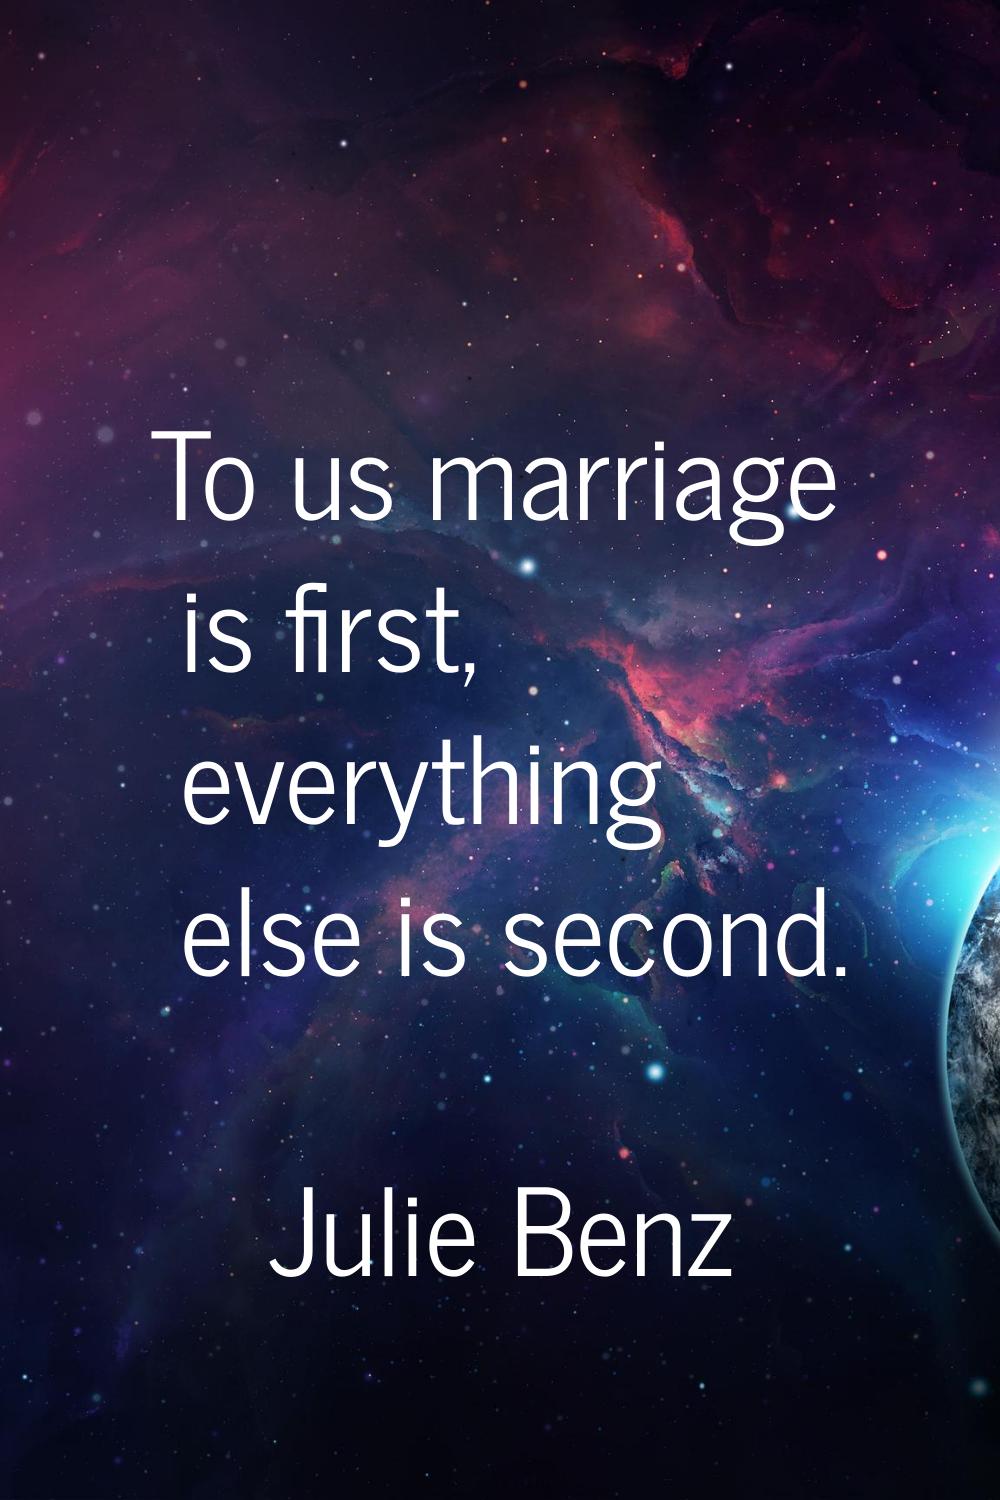 To us marriage is first, everything else is second.